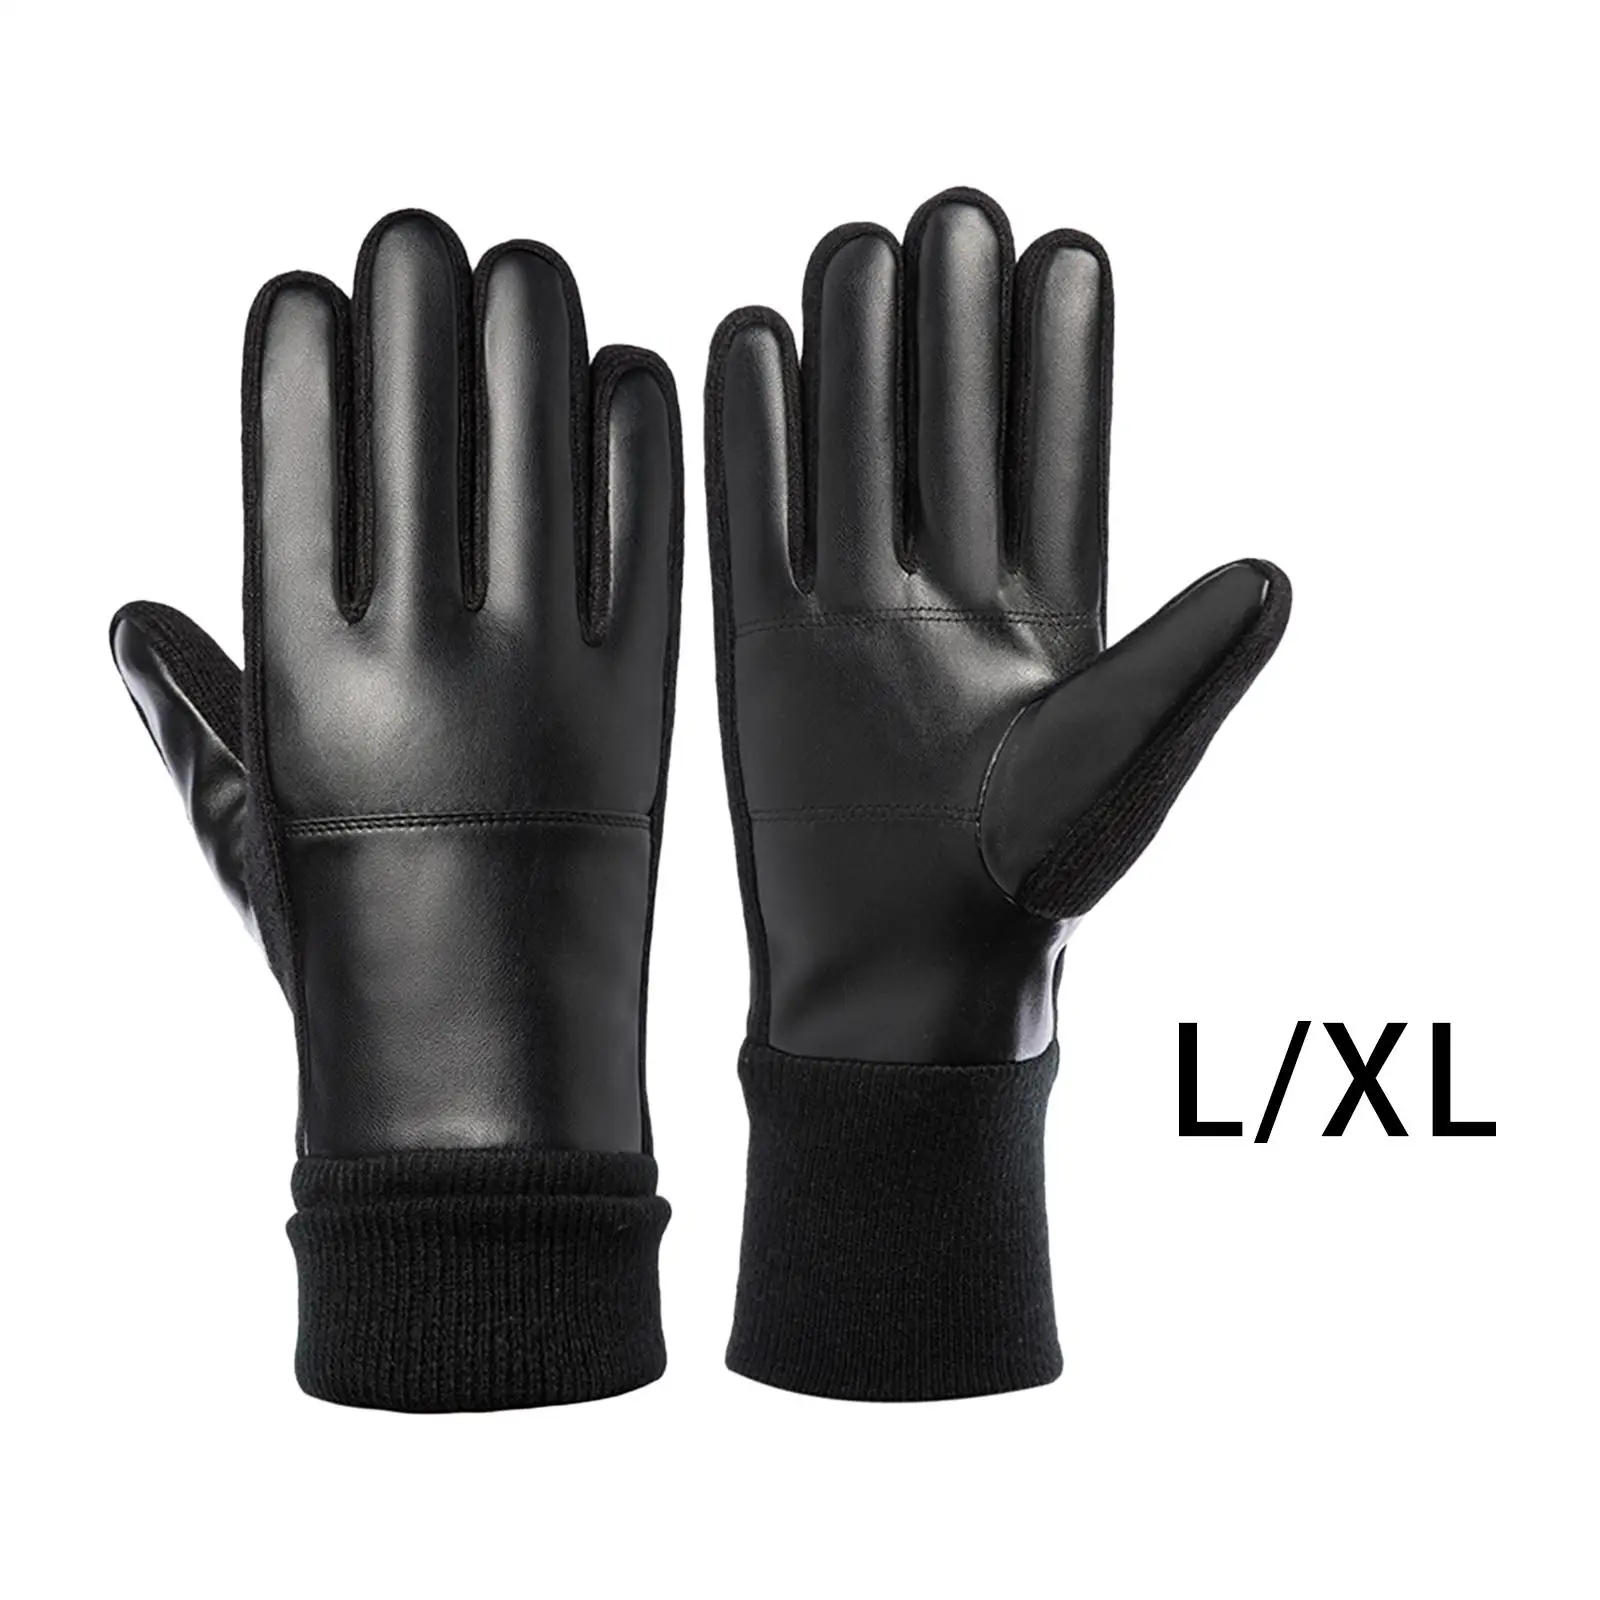 Thermal Men Gloves AntiSlip Warm Full Finger Waterproof Windproof for Bicycle Skiing Motorcycle Sport Cycling